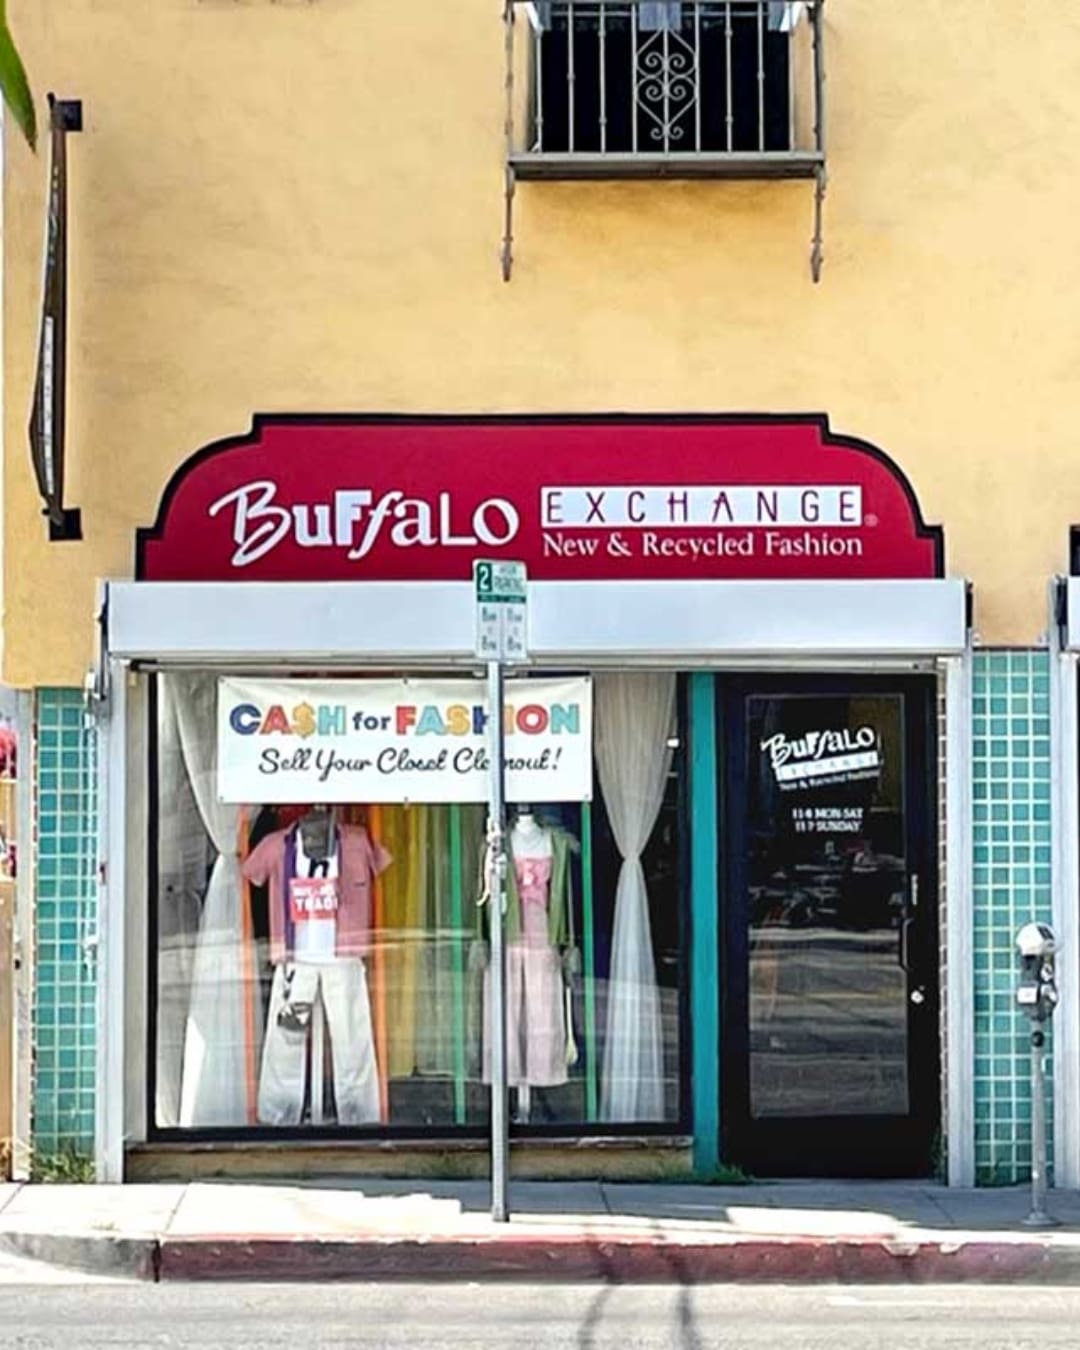 The best vintage stores in LA | The exterior of Buffalo Exchange